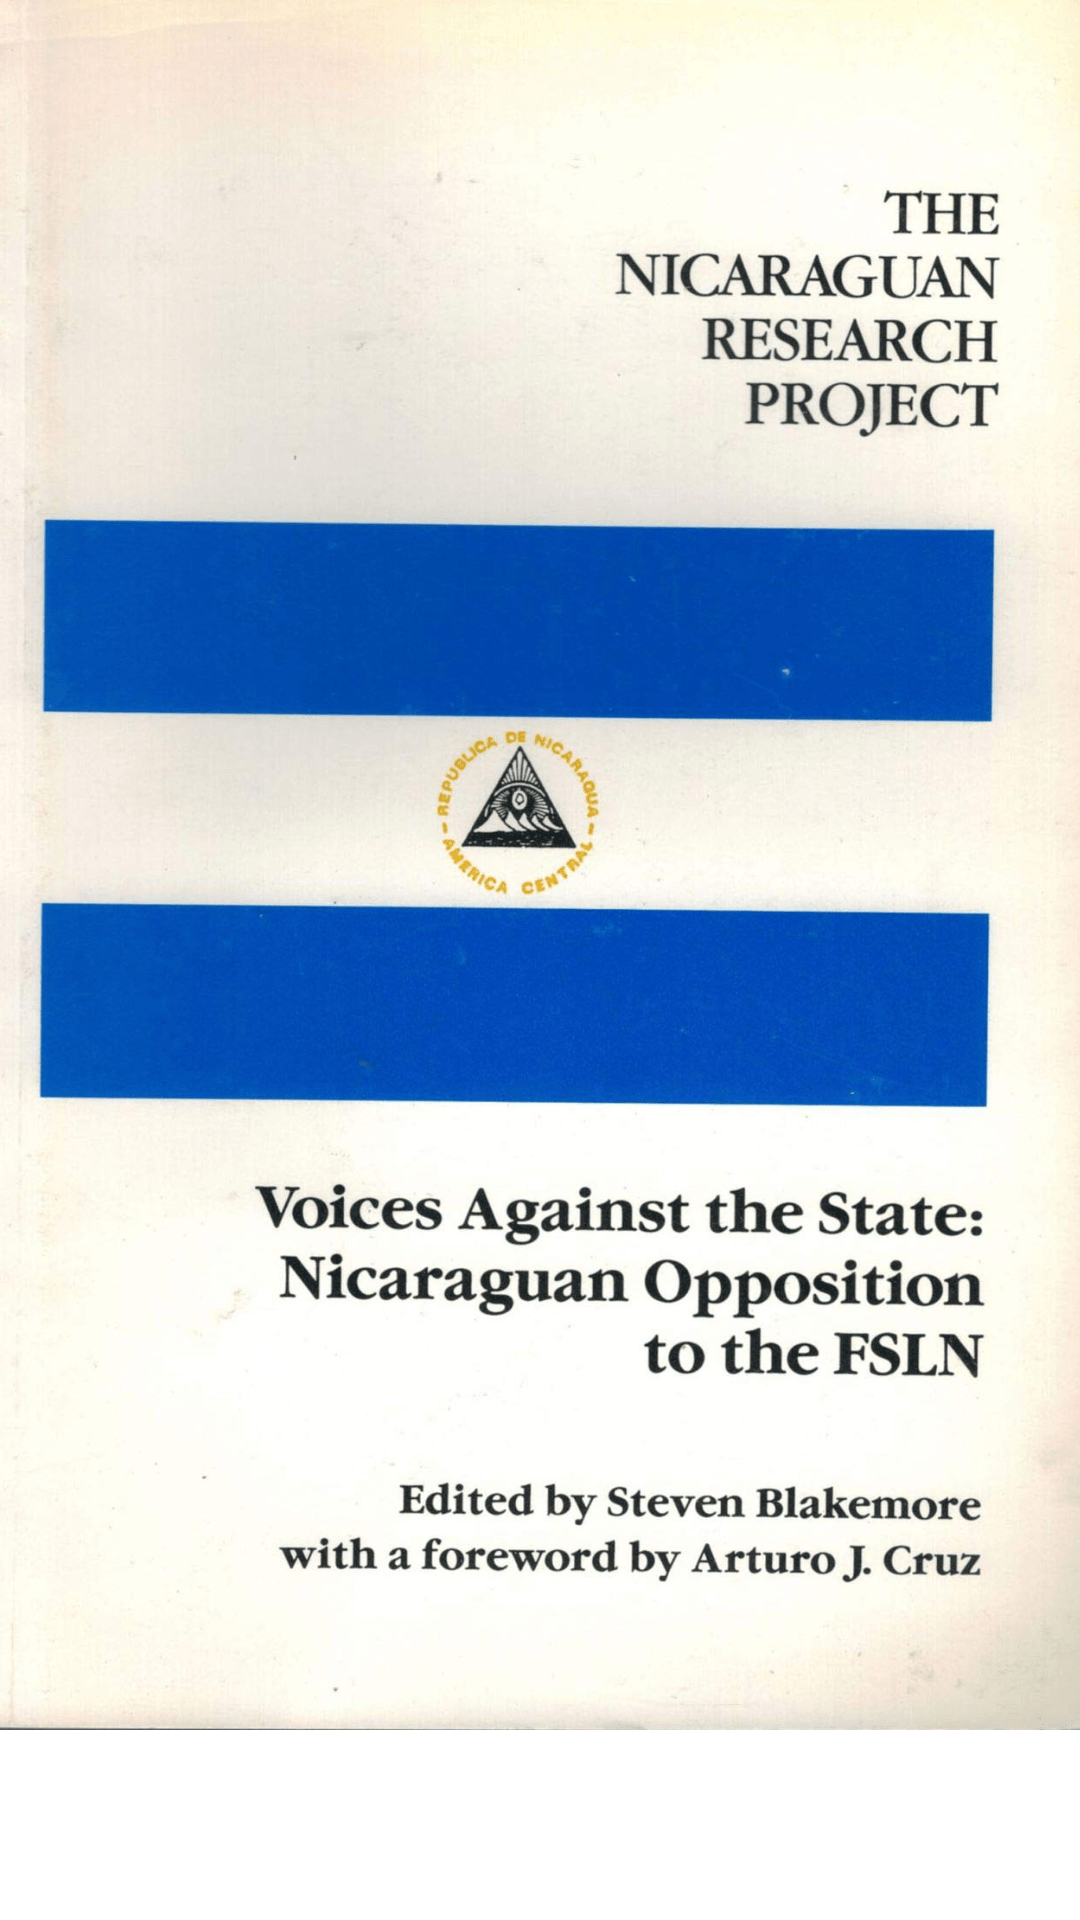 Voices Against the State: Nicaraguan Opposition to the FSLN